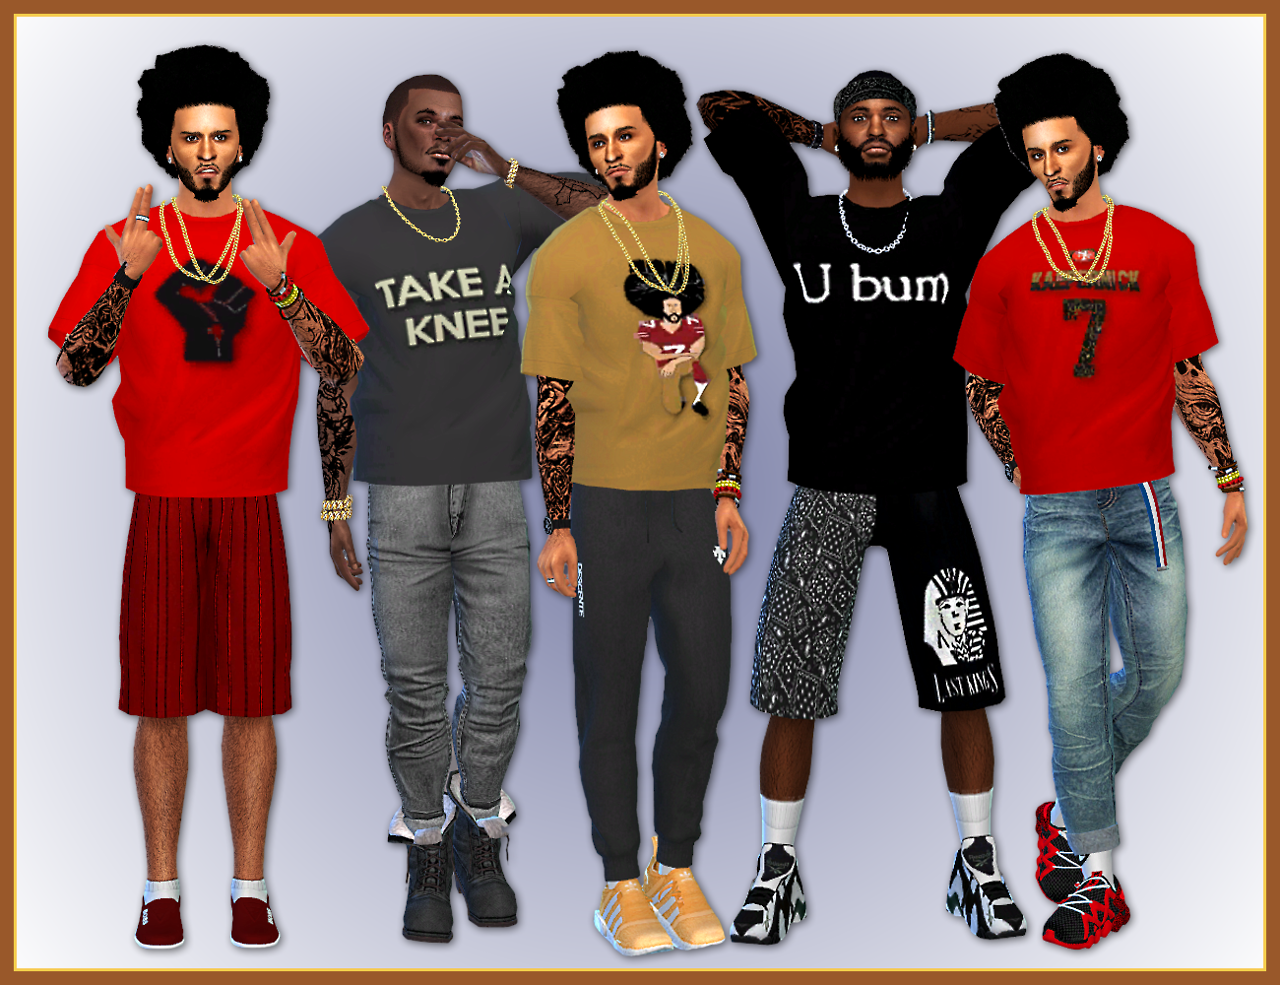 Sims 4 Urban Male Clothes Cc All in one Photos.